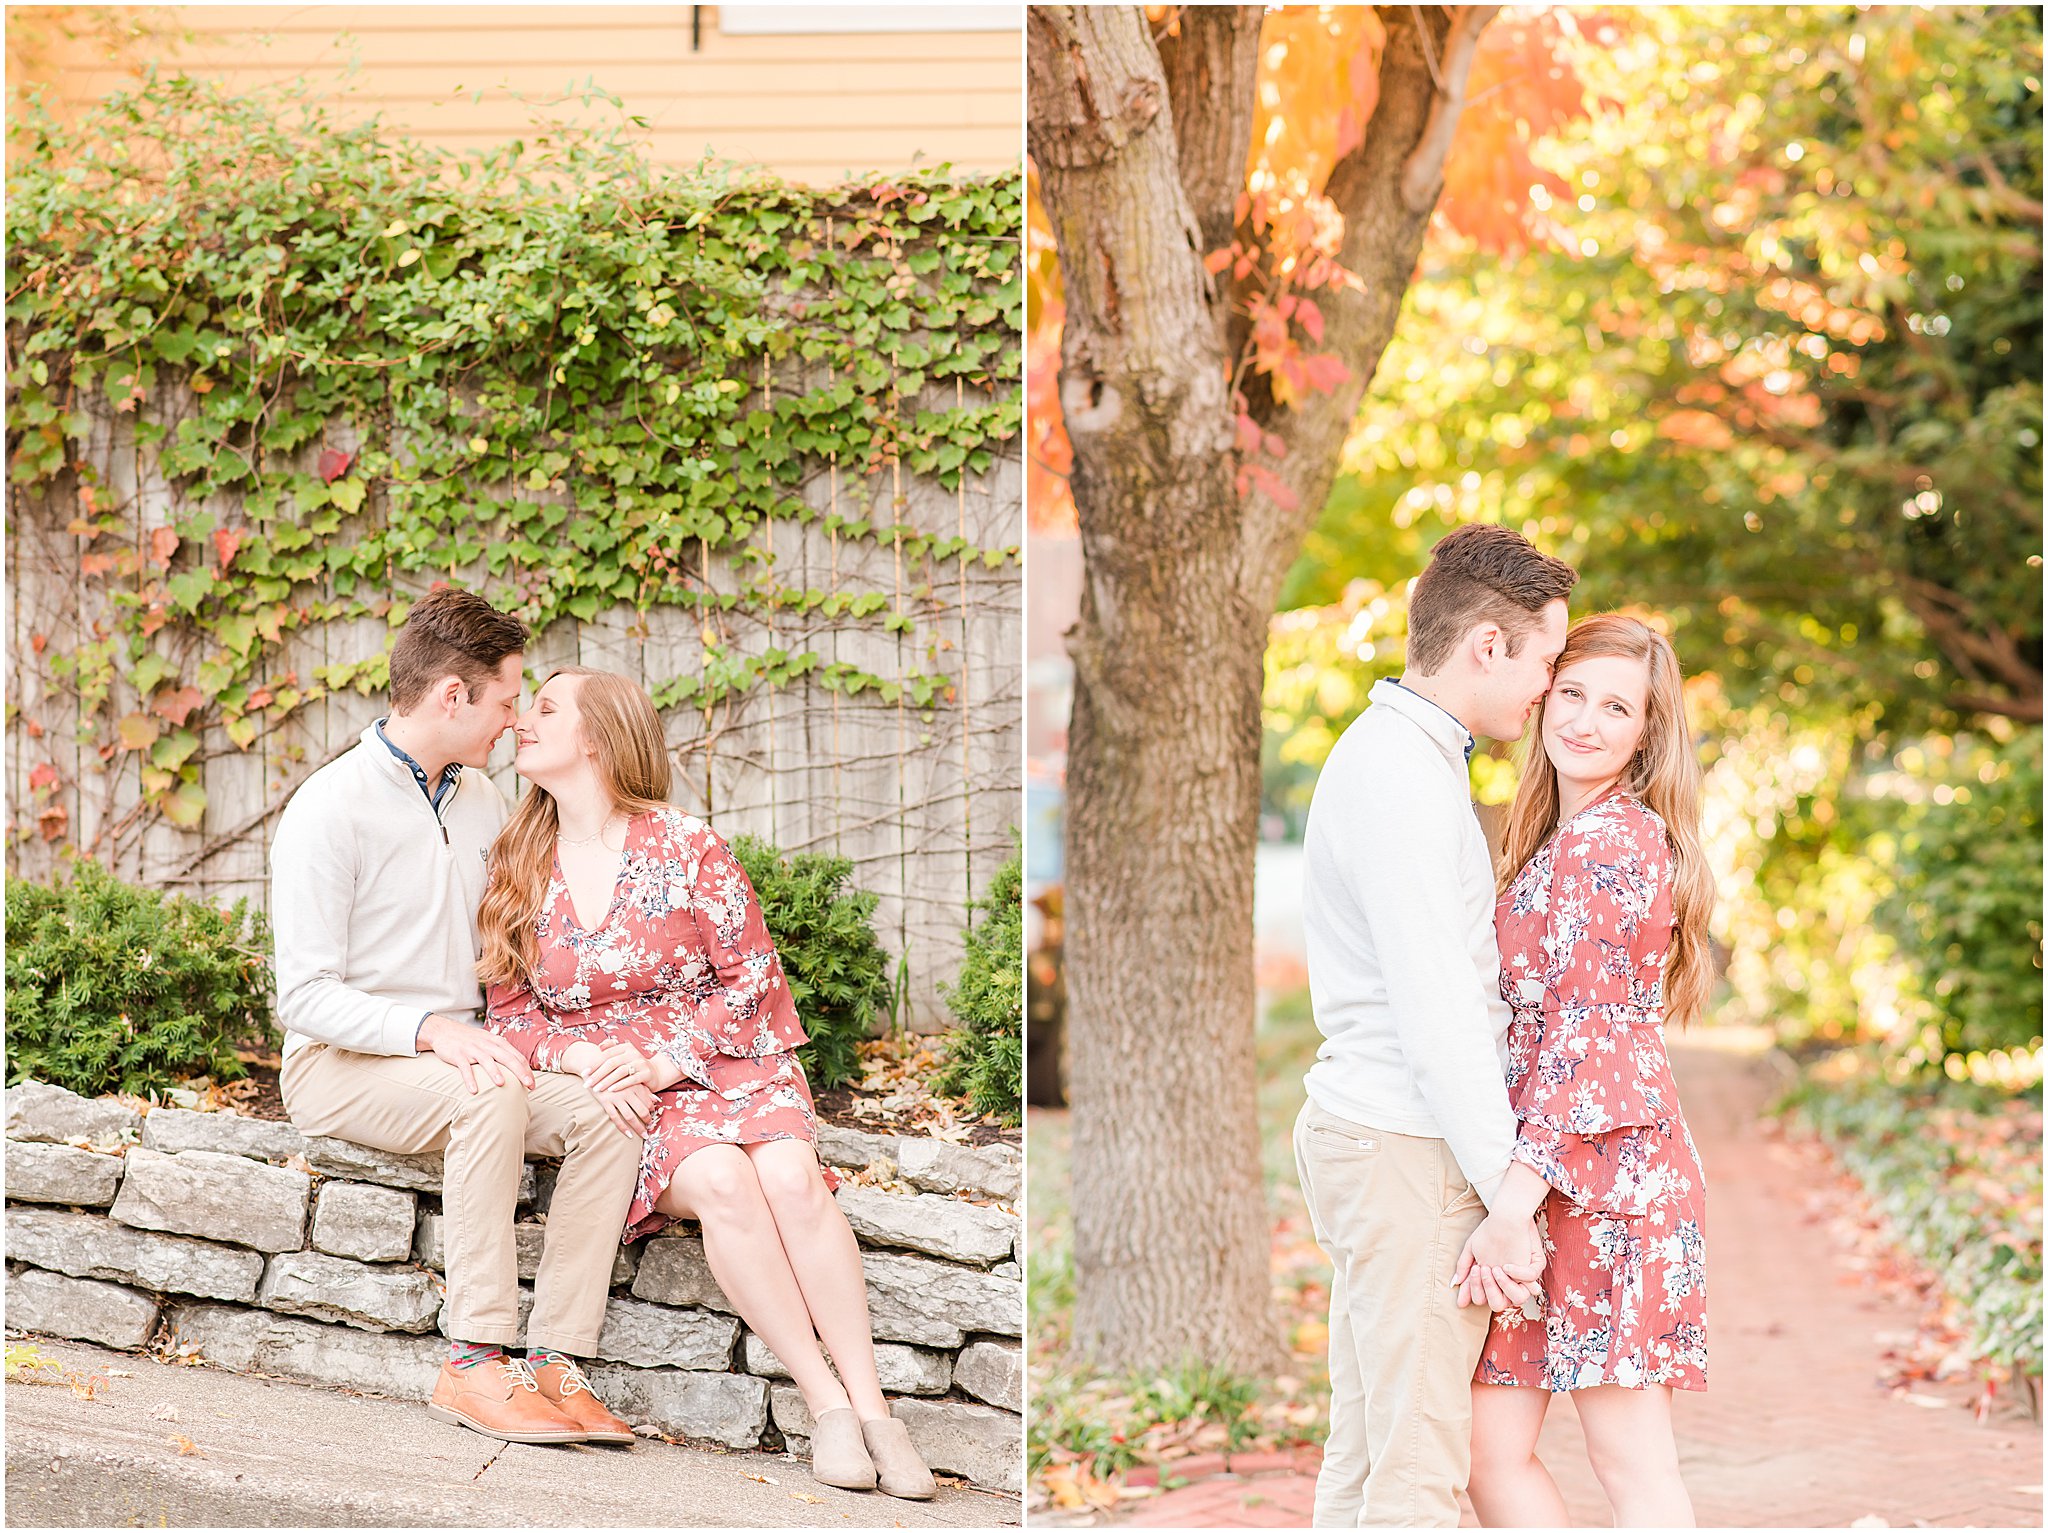 Couple nuzzling during Lockerbie Square engagement session